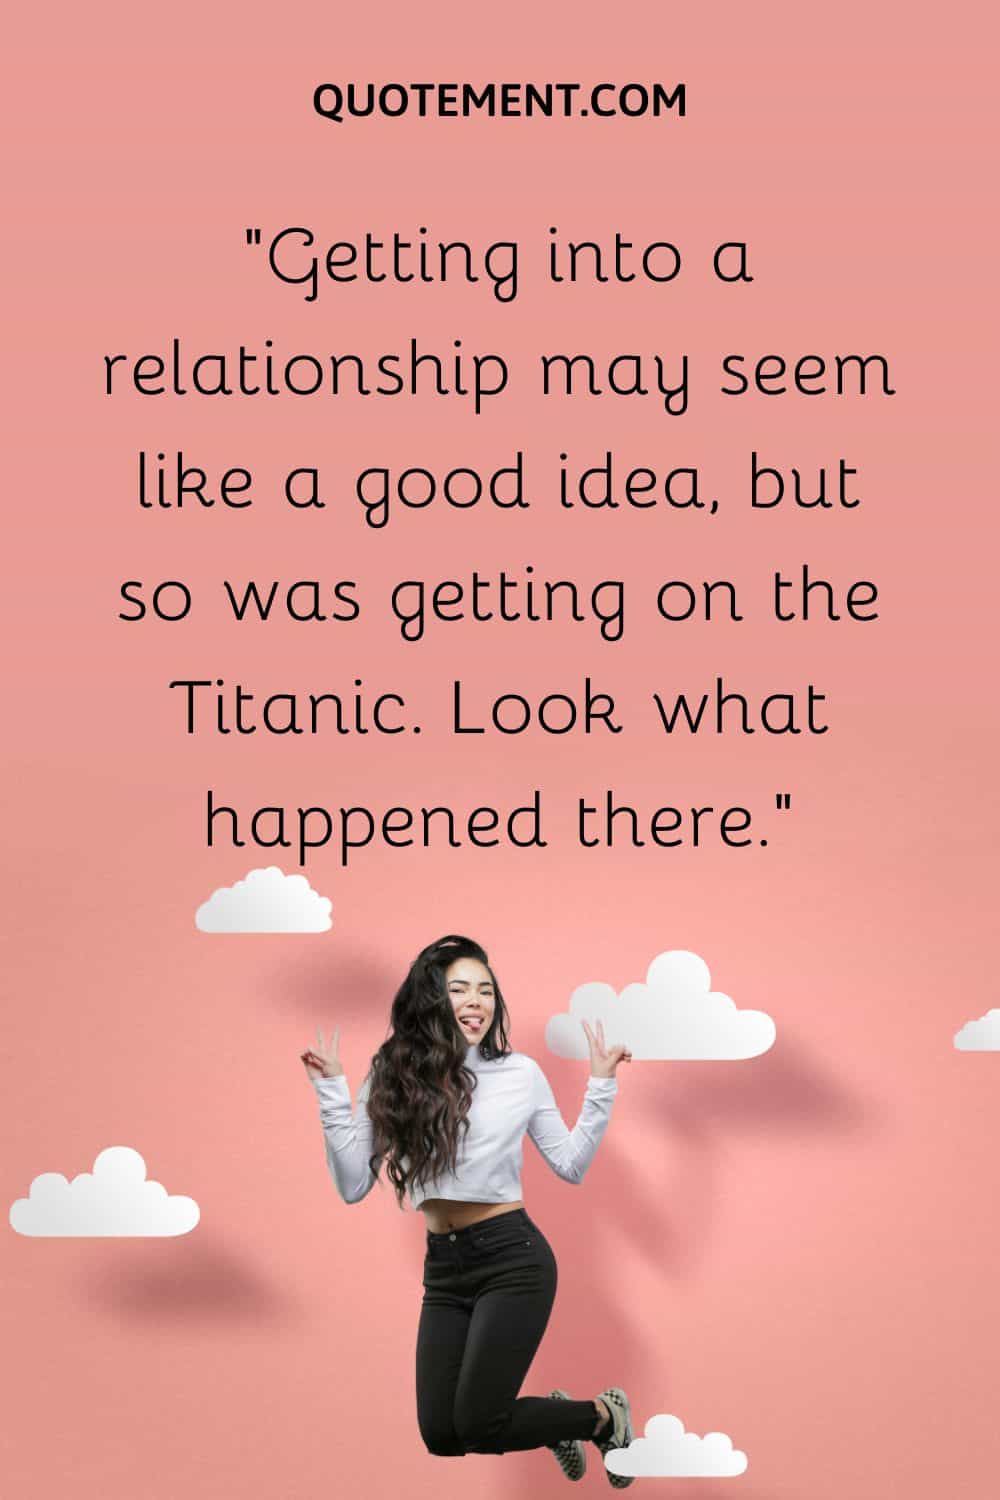 Getting into a relationship may seem like a good idea, but so was getting on the Titanic